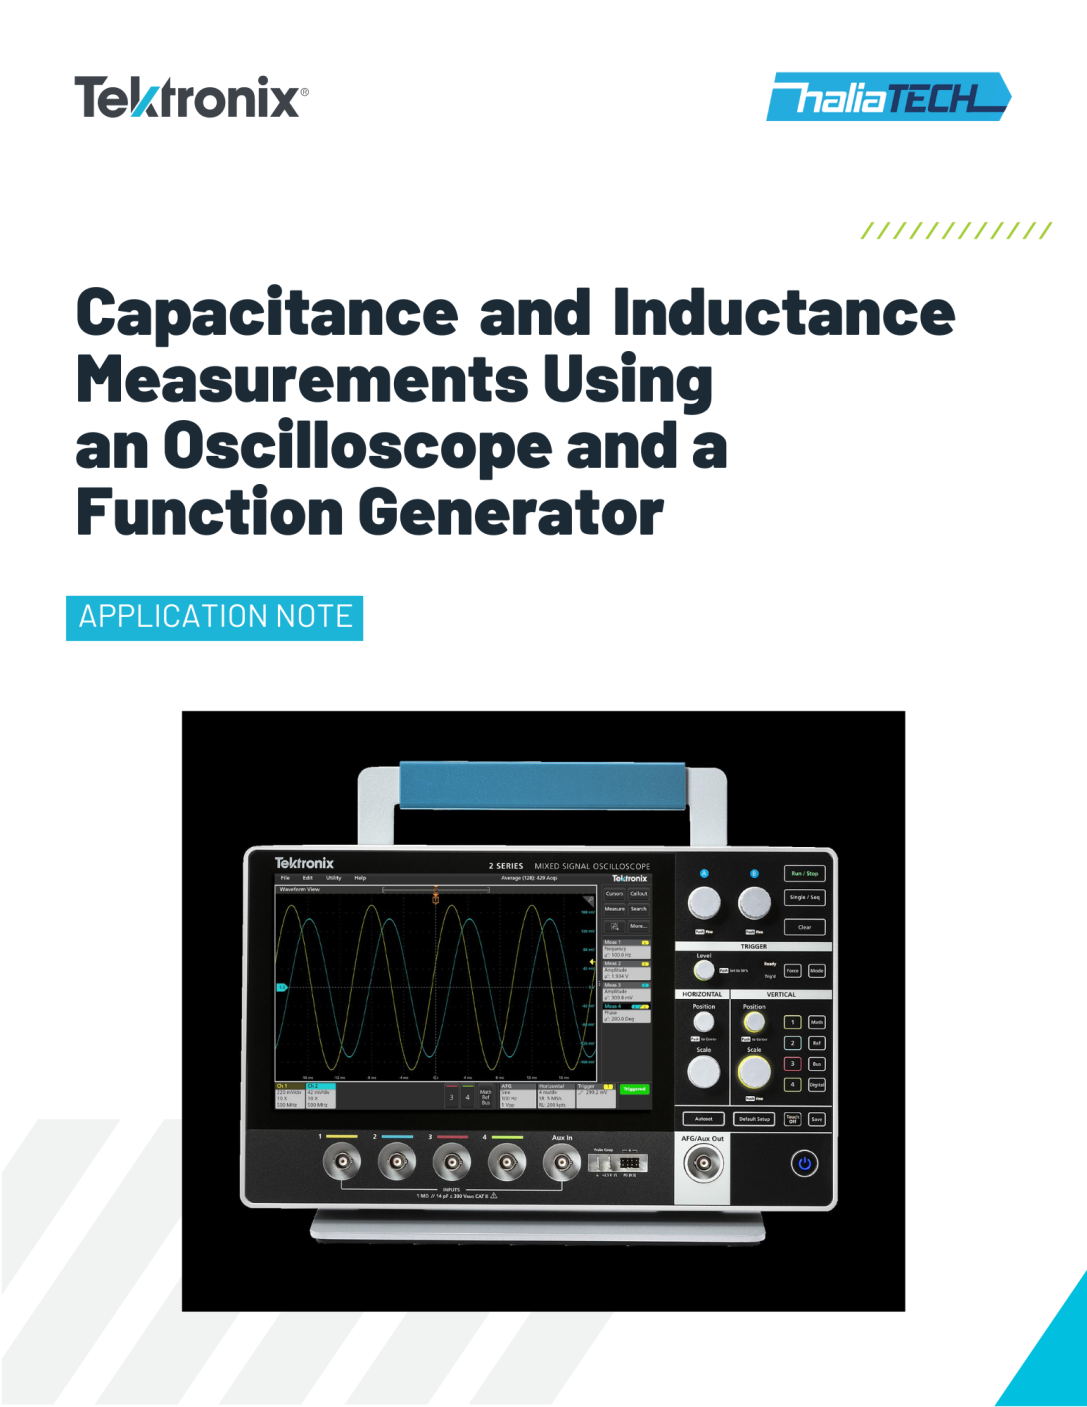 Capacitance and Inductance Measurements Using an Oscilloscope and a Function Generator, MSO 2 Series From Tektronix!